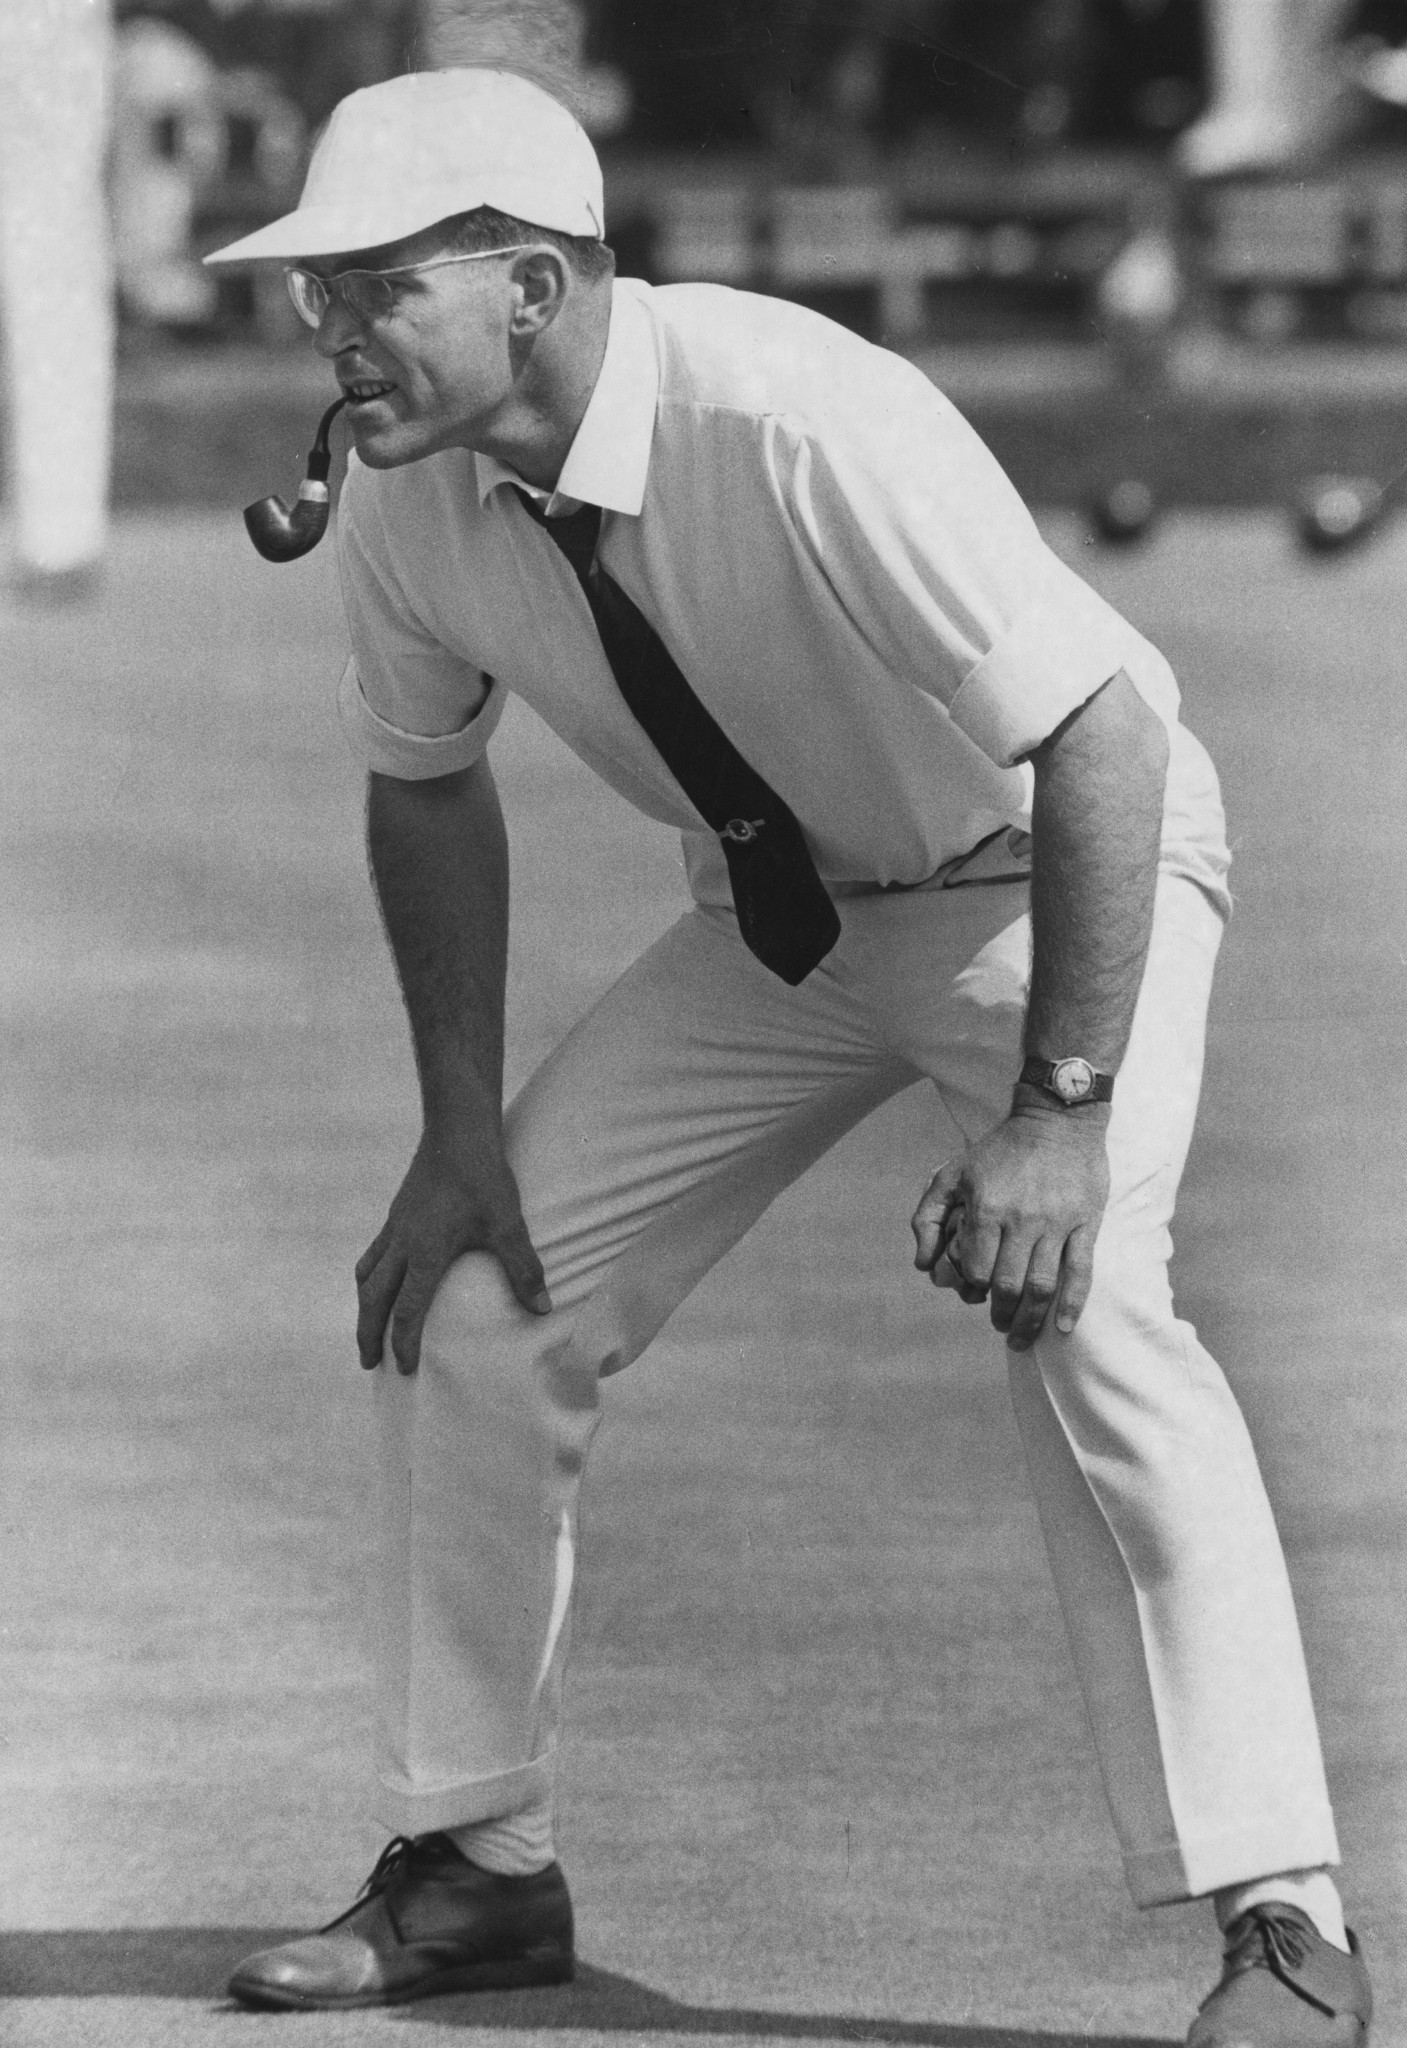 David Bryant, who died last week aged 88, was a multiple world and Commonwealth bowls champion - and Pipe Smoker of the Year in 1986 ©Getty Images